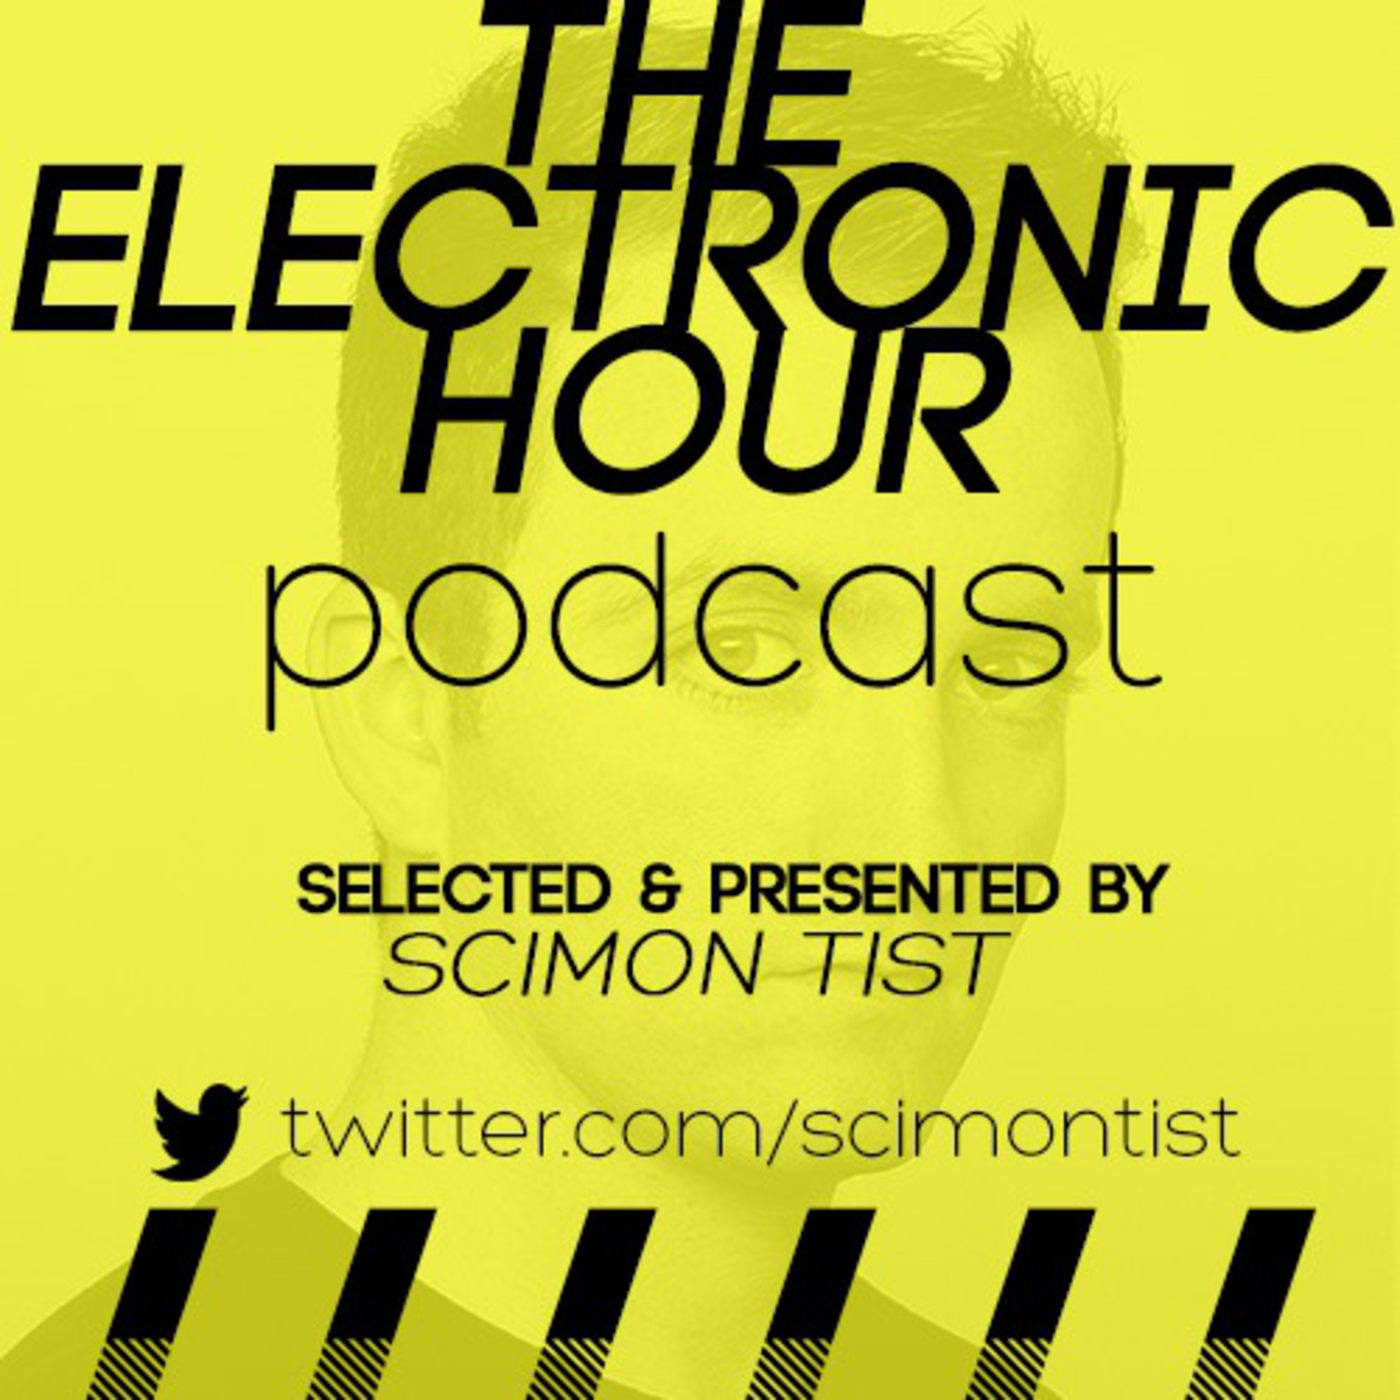 The Electronic Hour Podcast || Selected & Presented By Scimon Tist